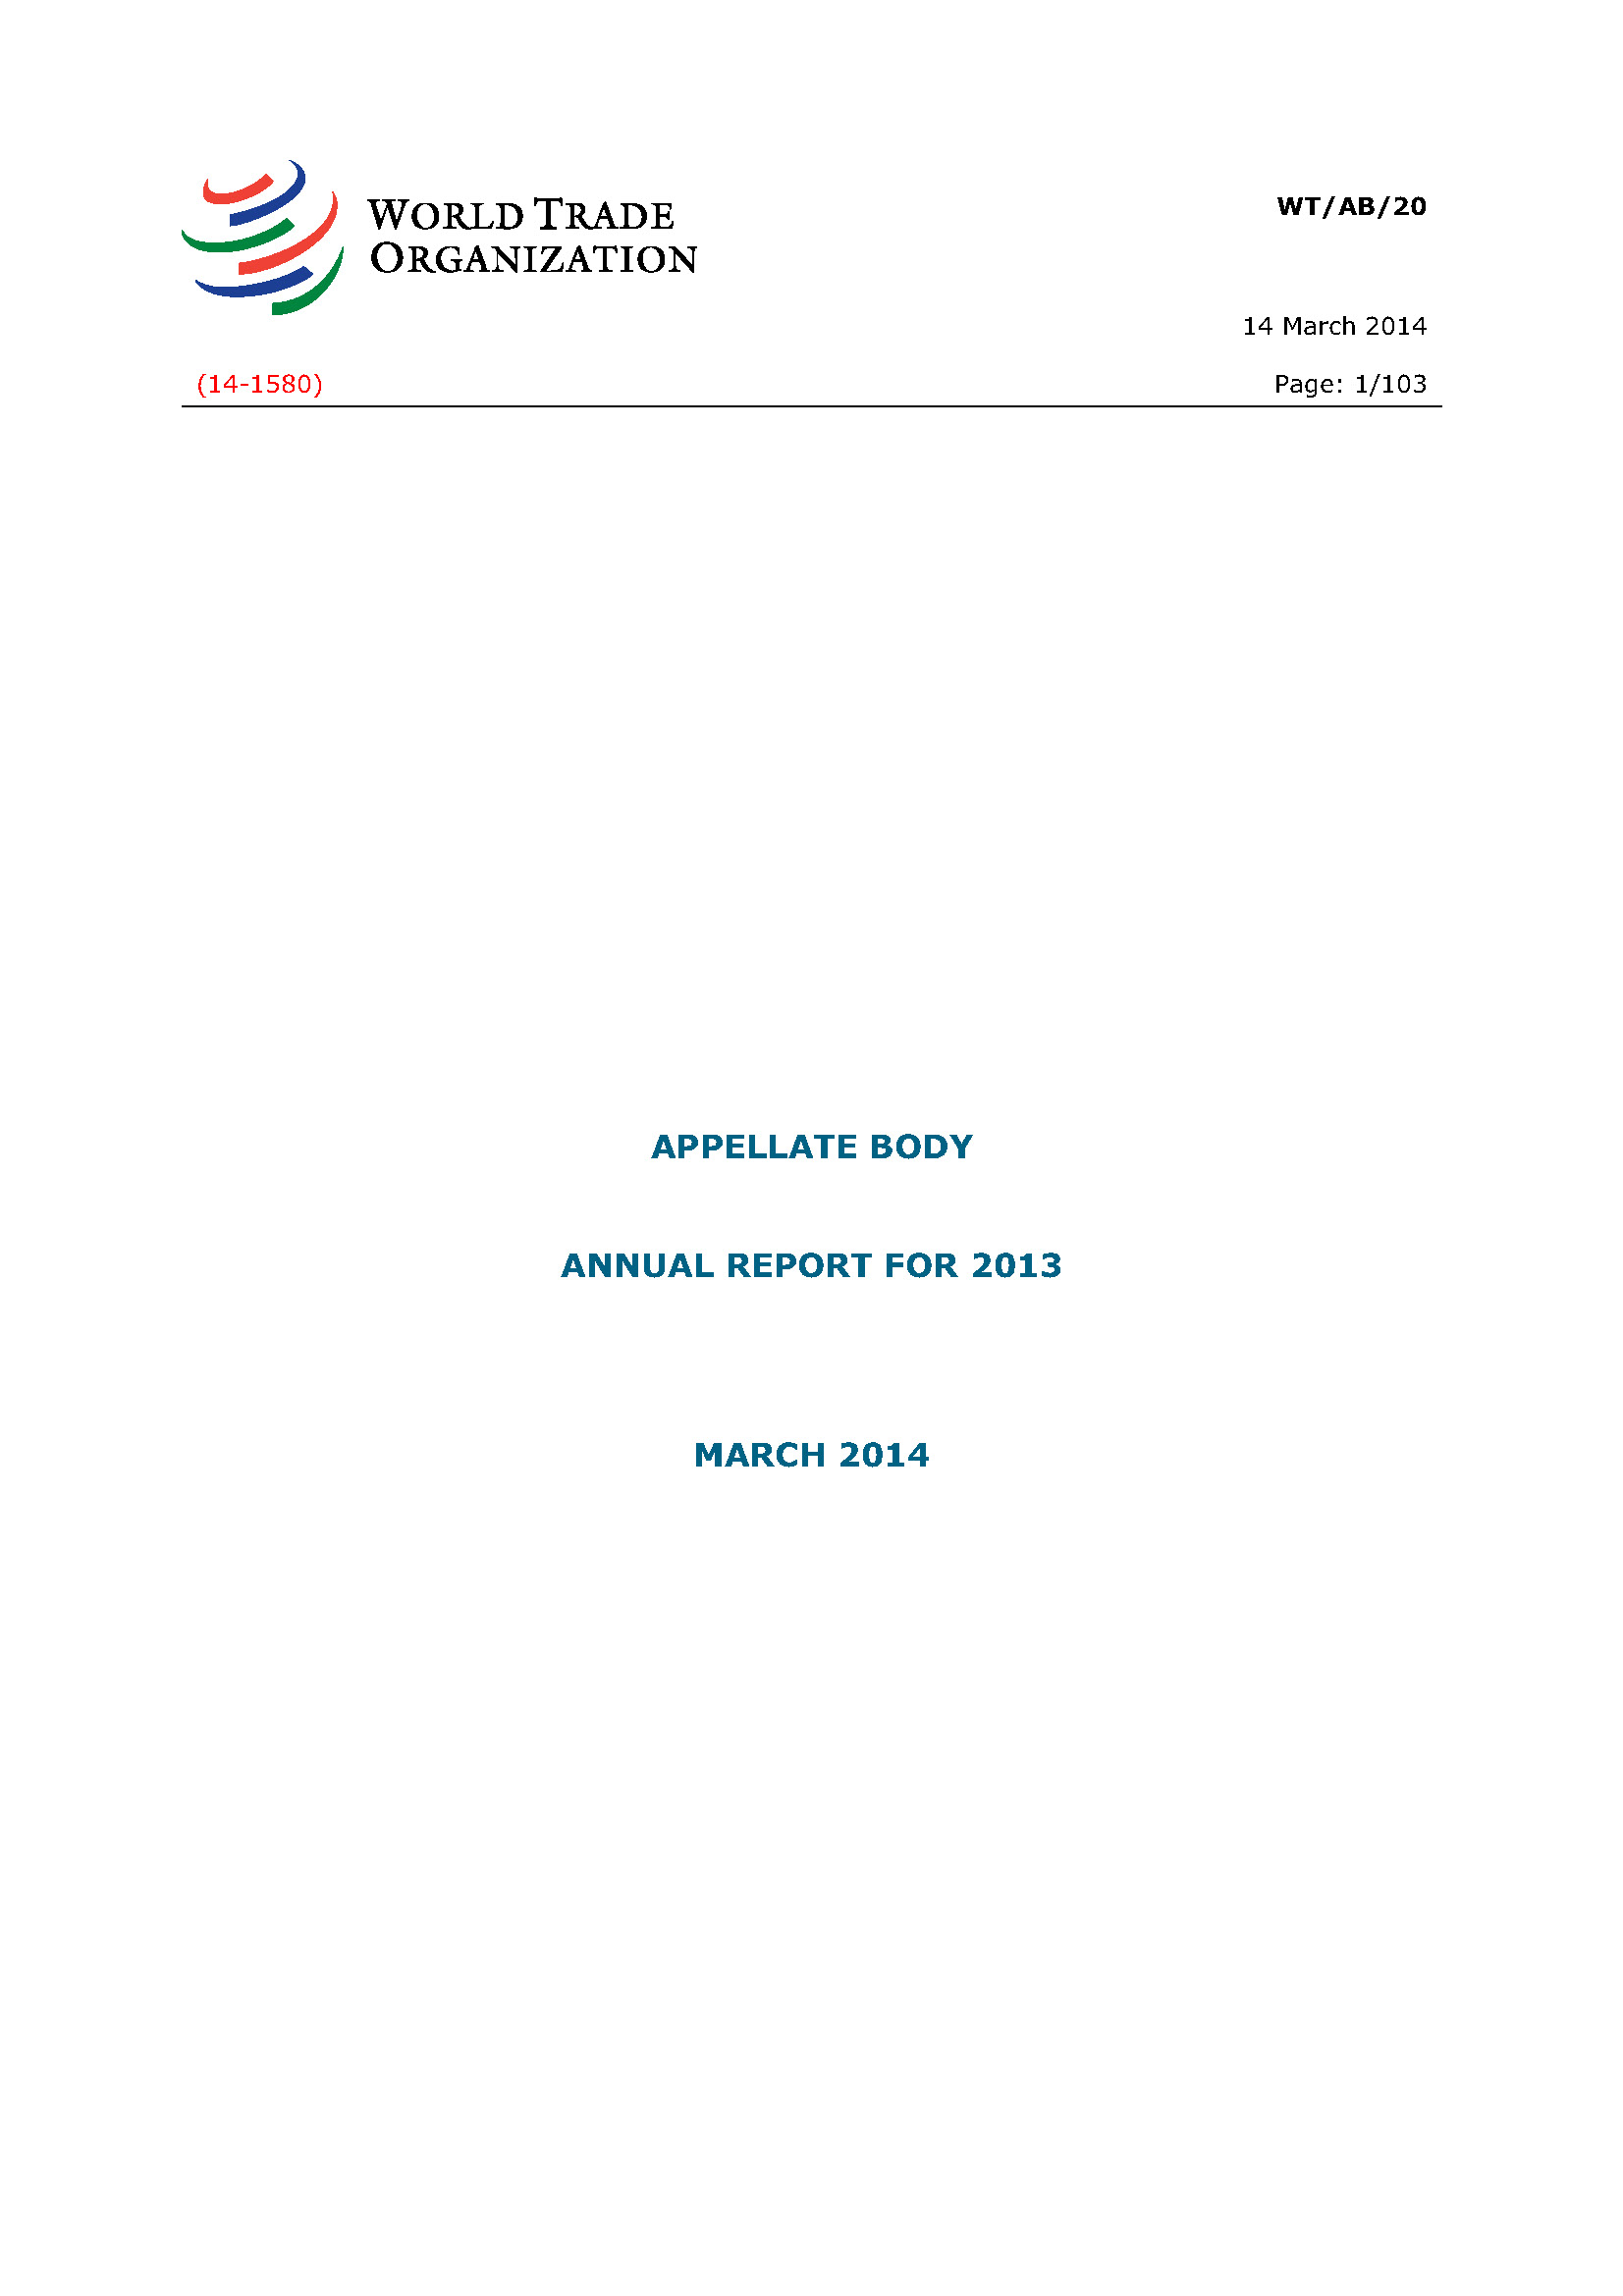 image of Appellate Body annual report for 2013